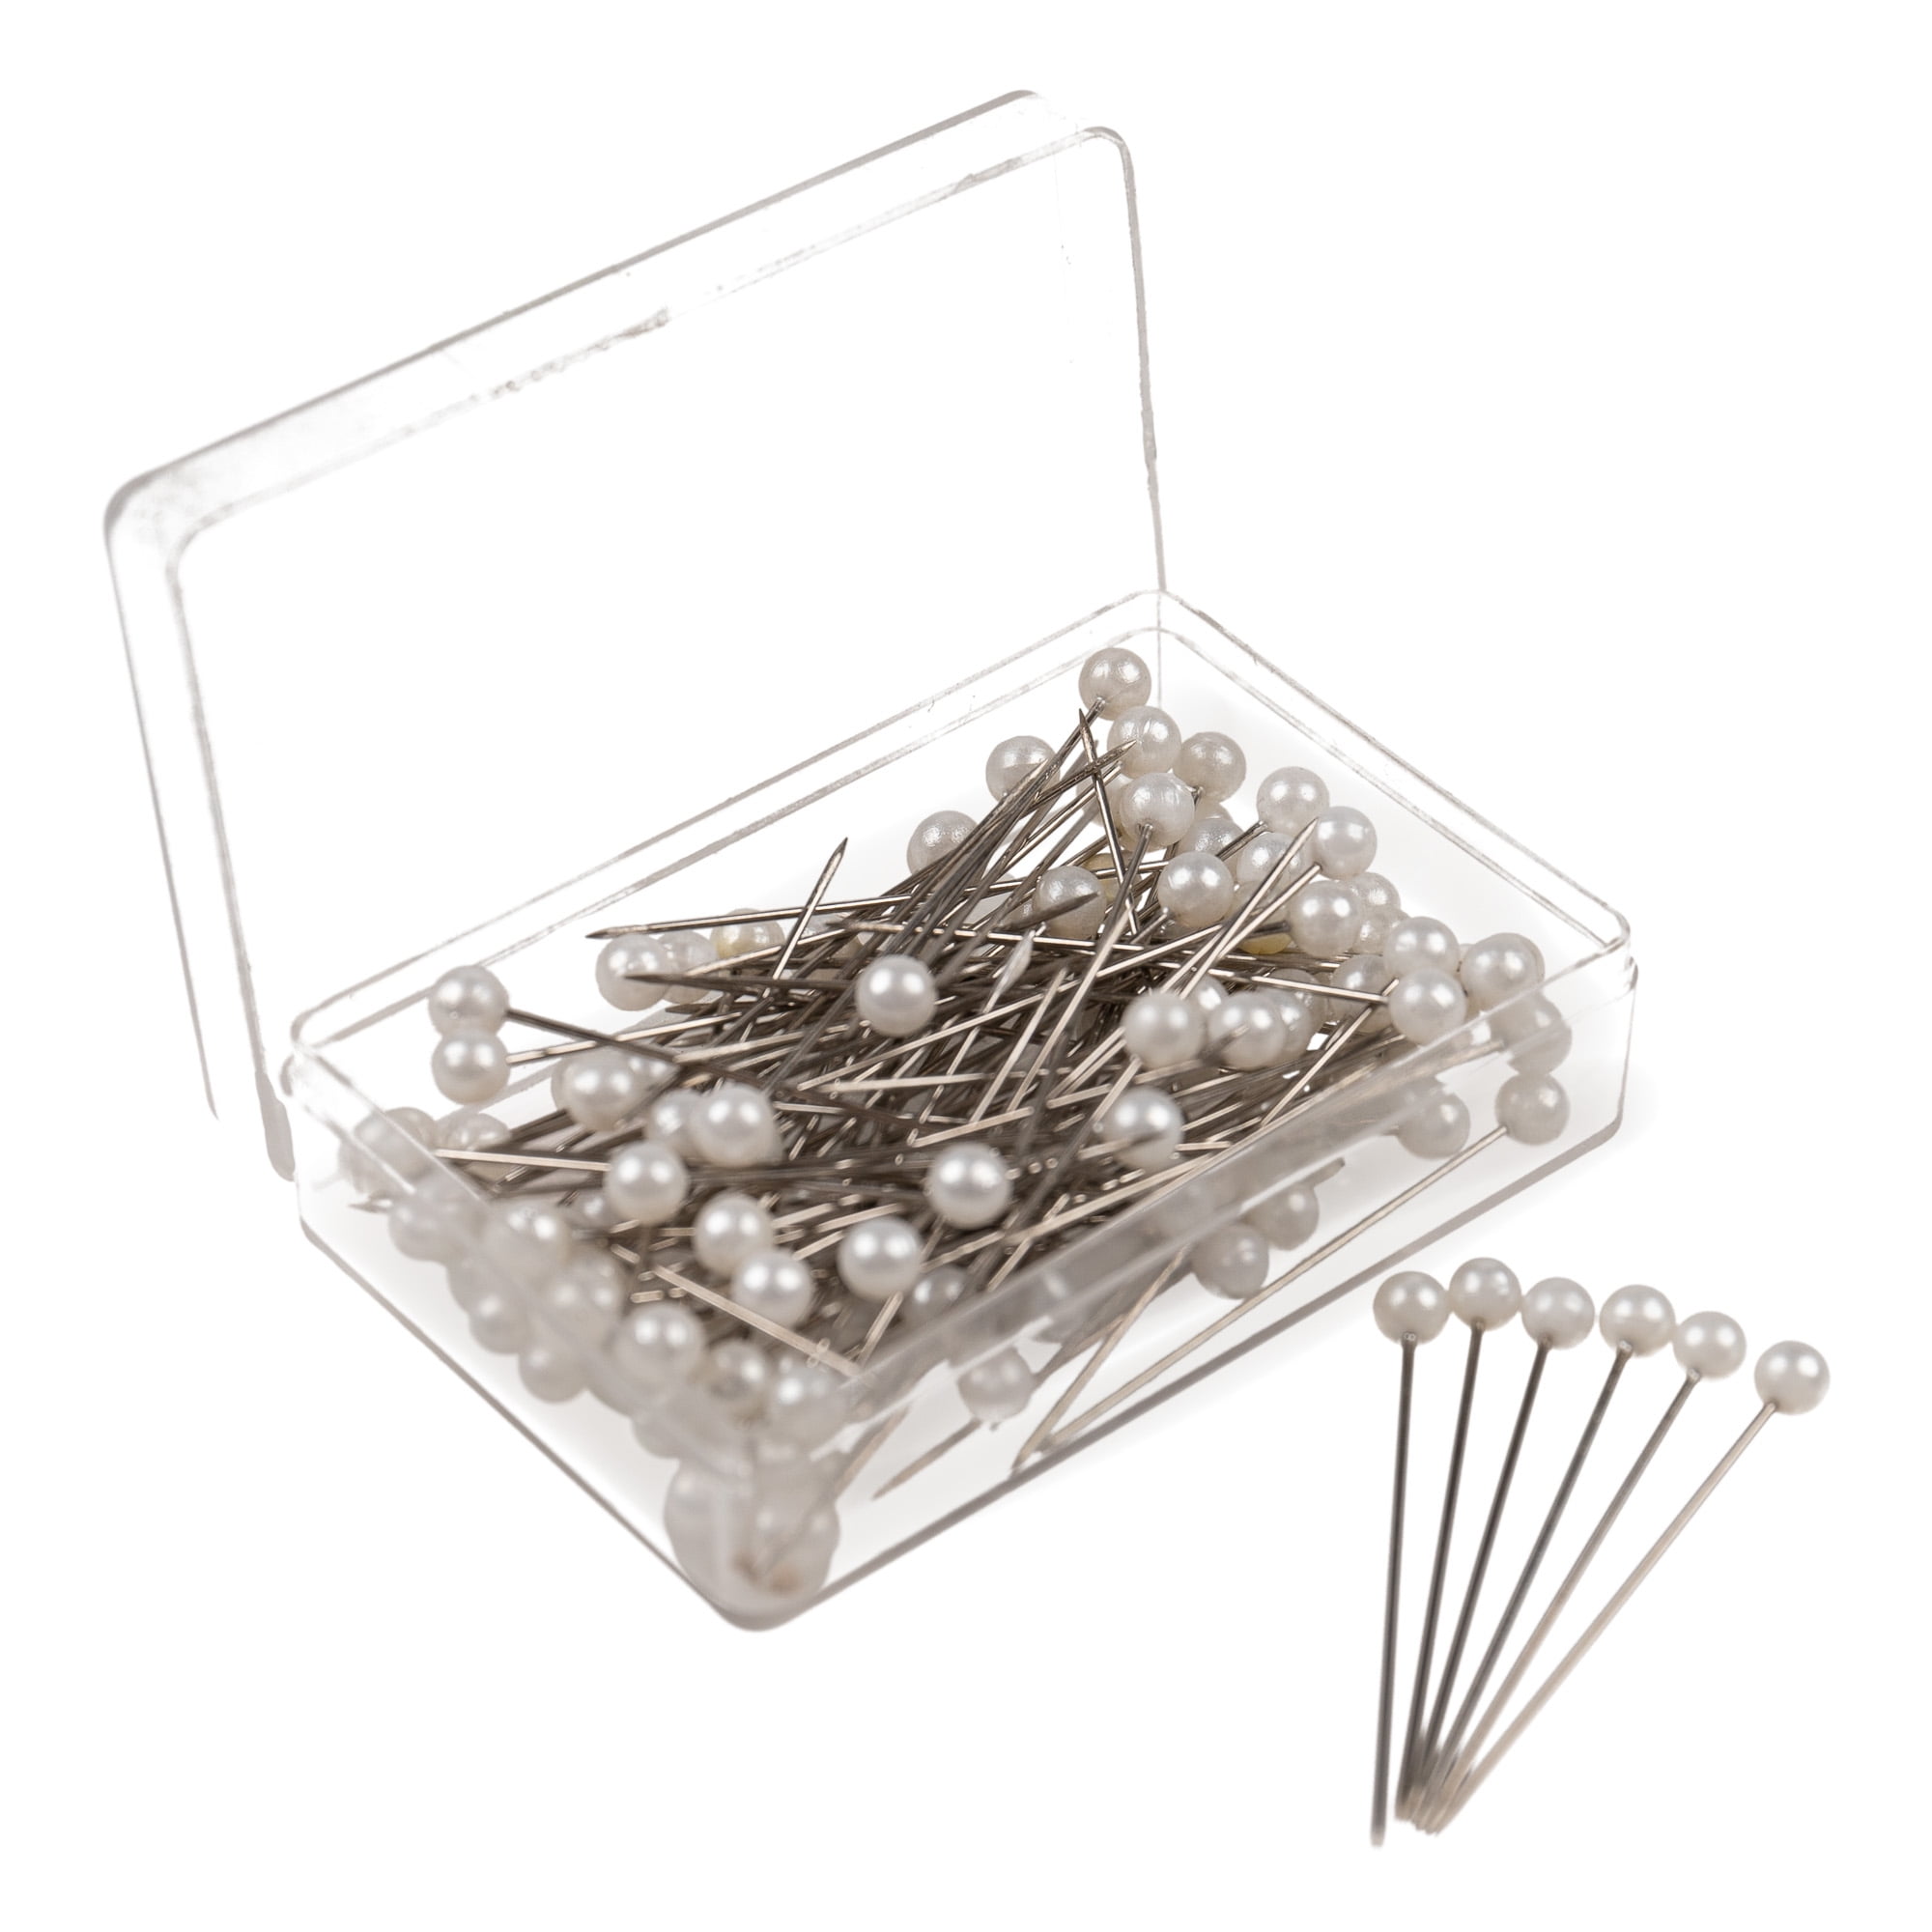 100 pieces 3.6mm Round Pearl Head Straight Sewing Pins | White ...